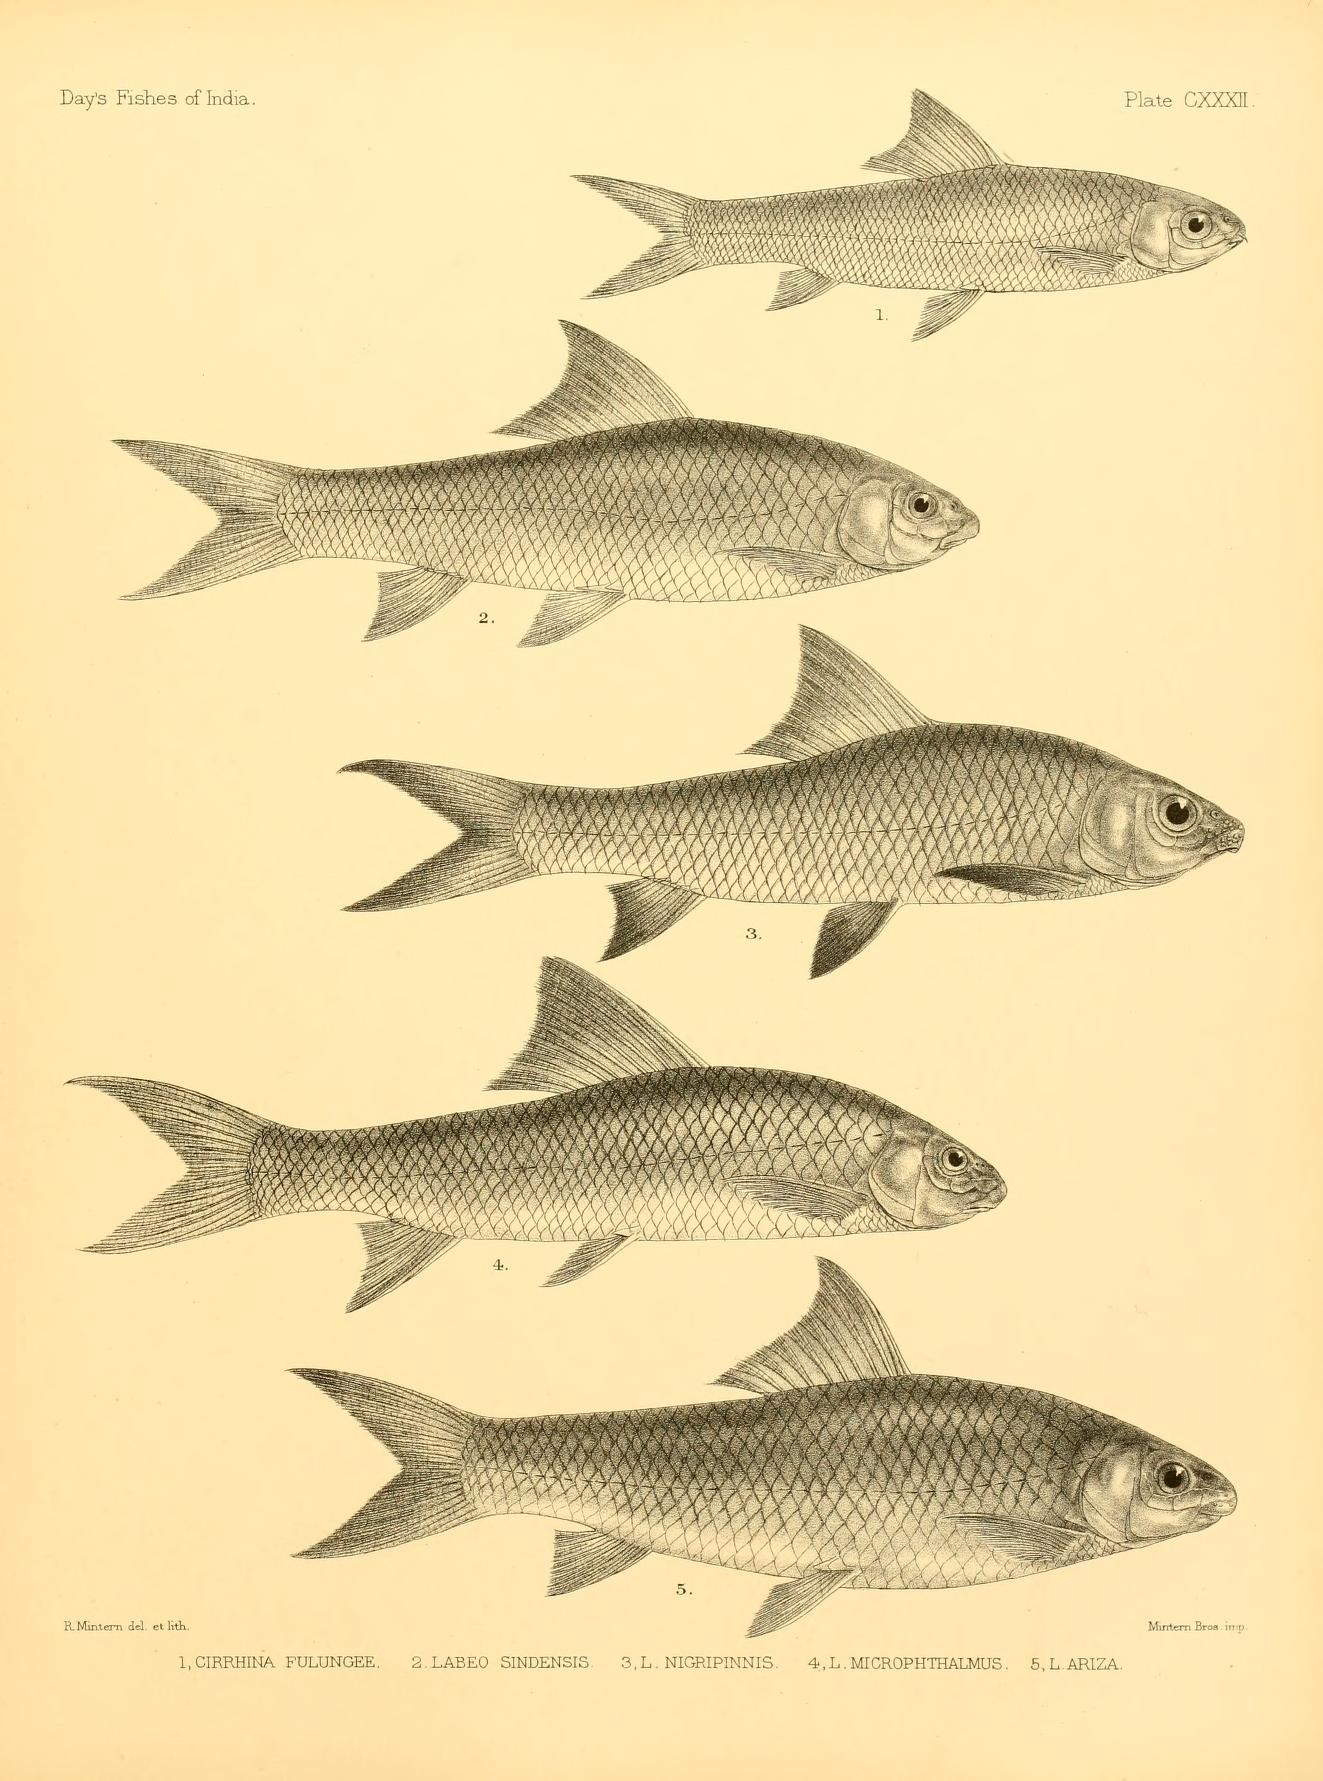 a line up of different types of fish